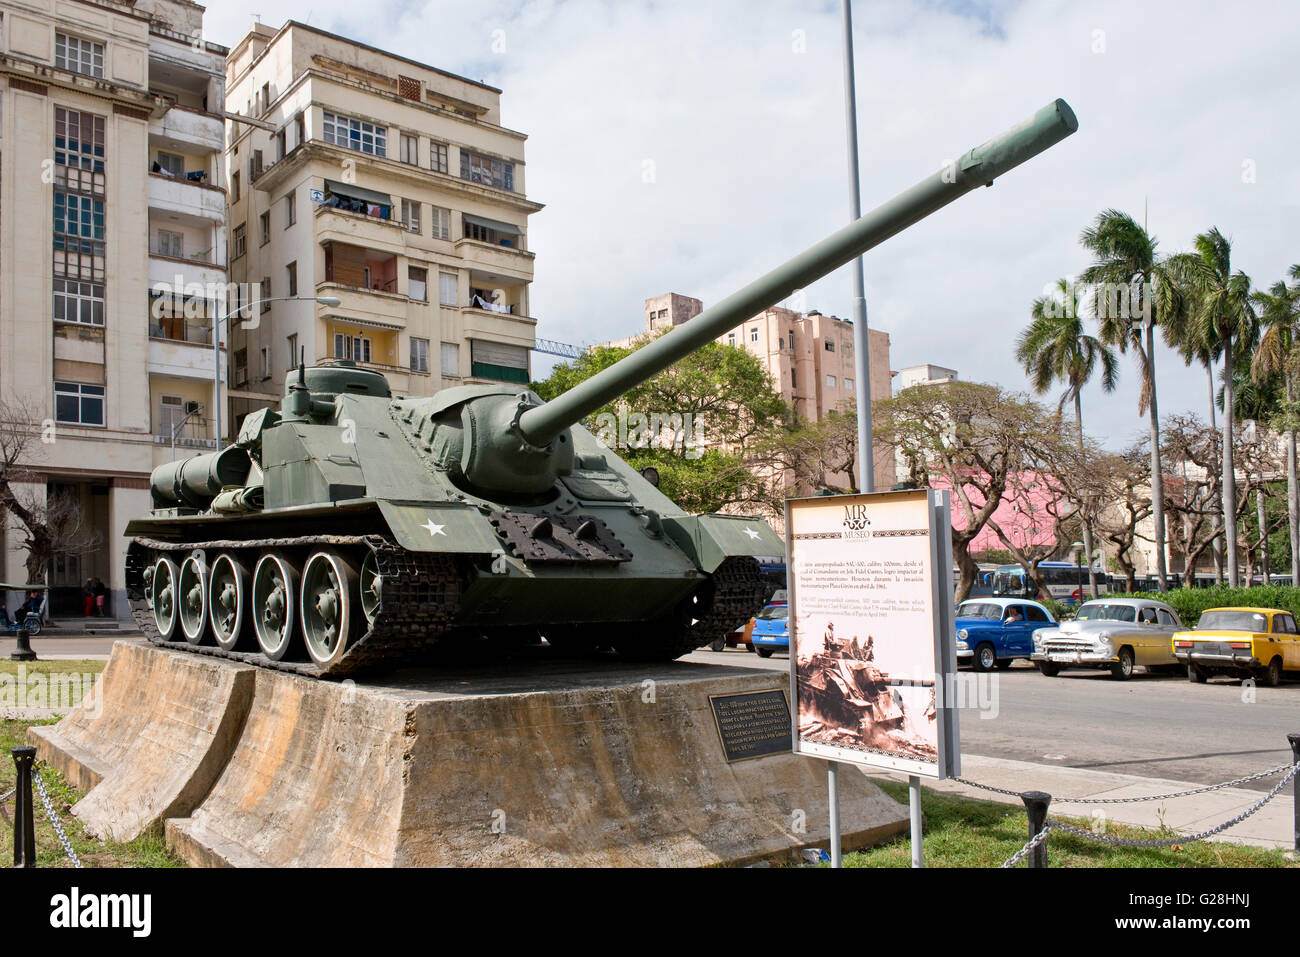 The SAU-100 tank used by Fidel Castro outside the Museum of the Revolution in the Old Town of Havana La Habana, Cuba Stock Photo